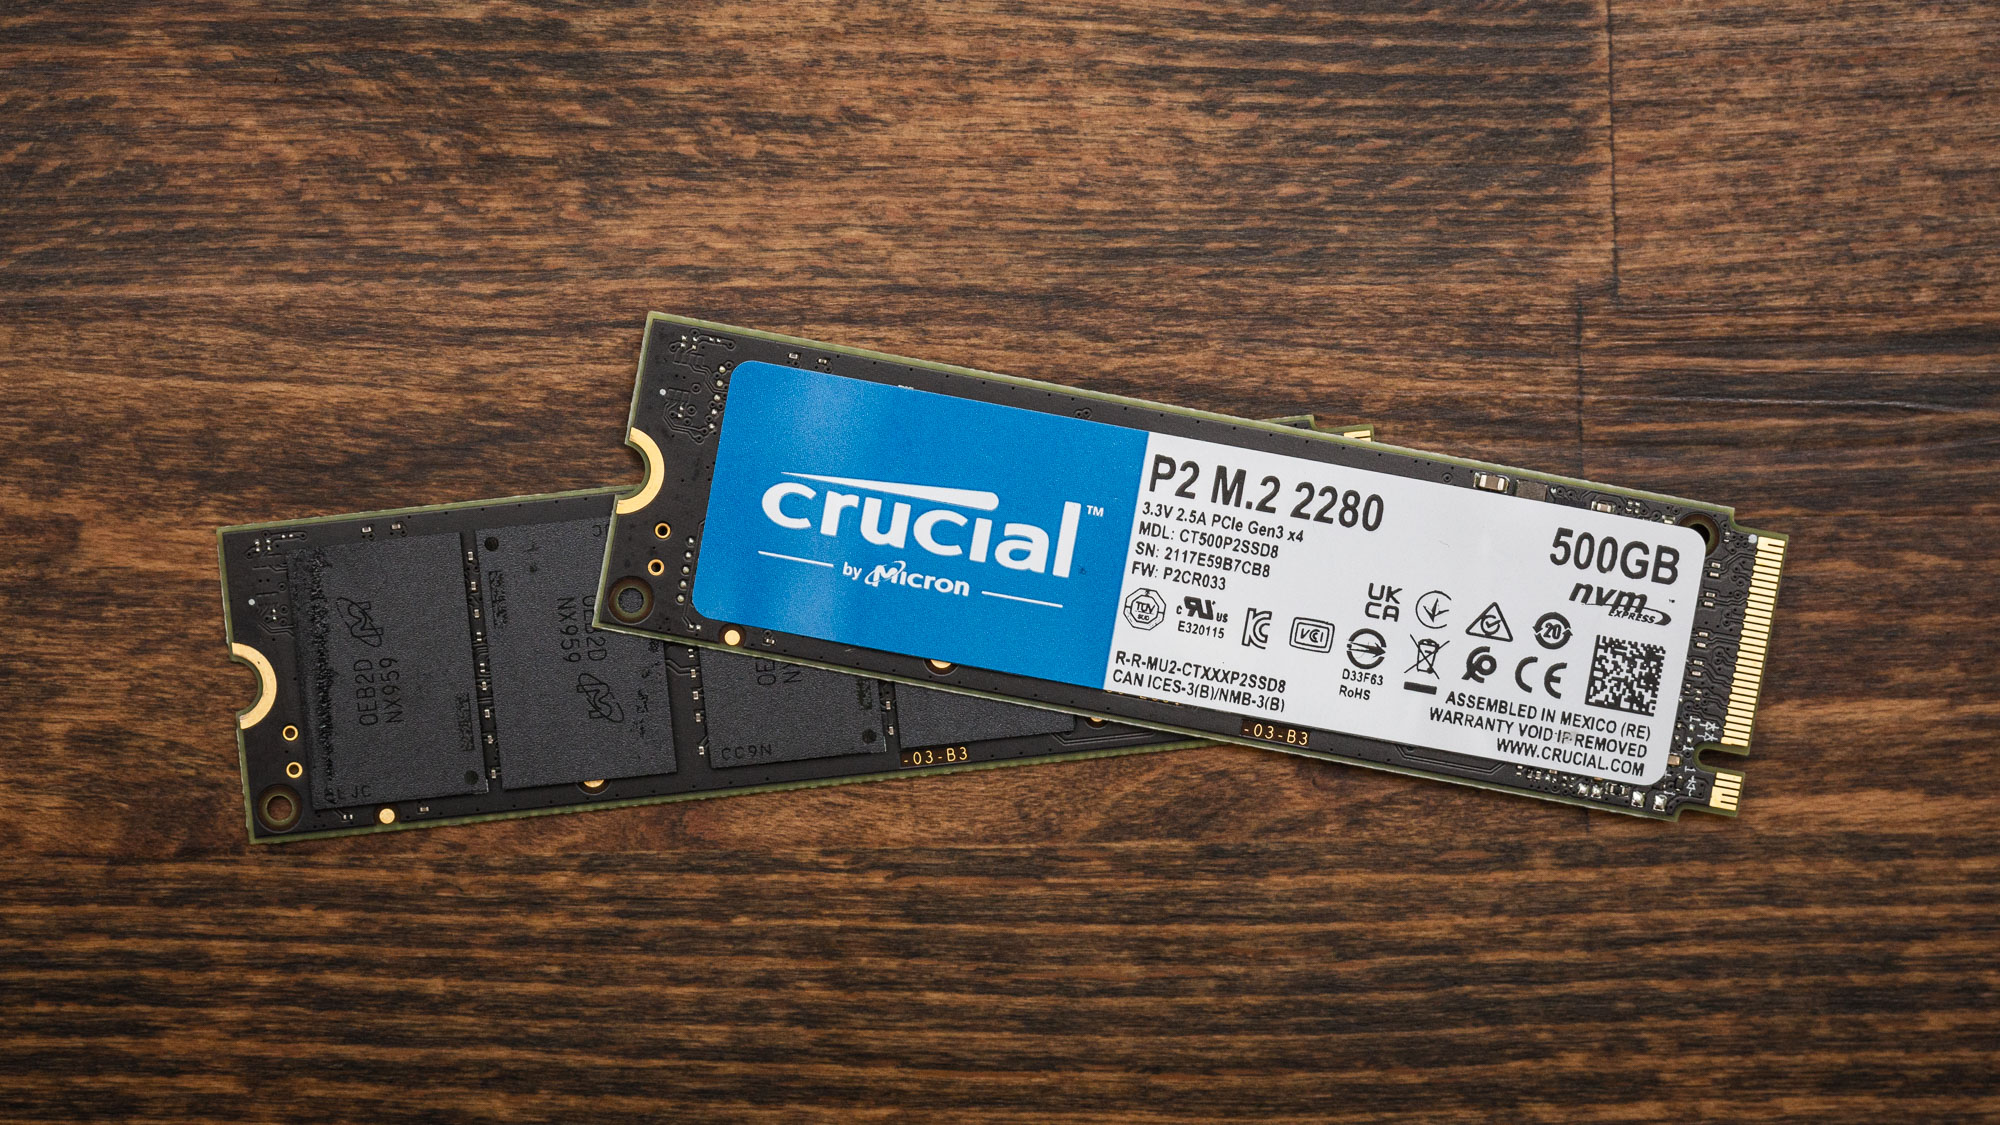 Flash Swap: Re-Testing P2 SSD After QLC Downgrade | Tom's Hardware